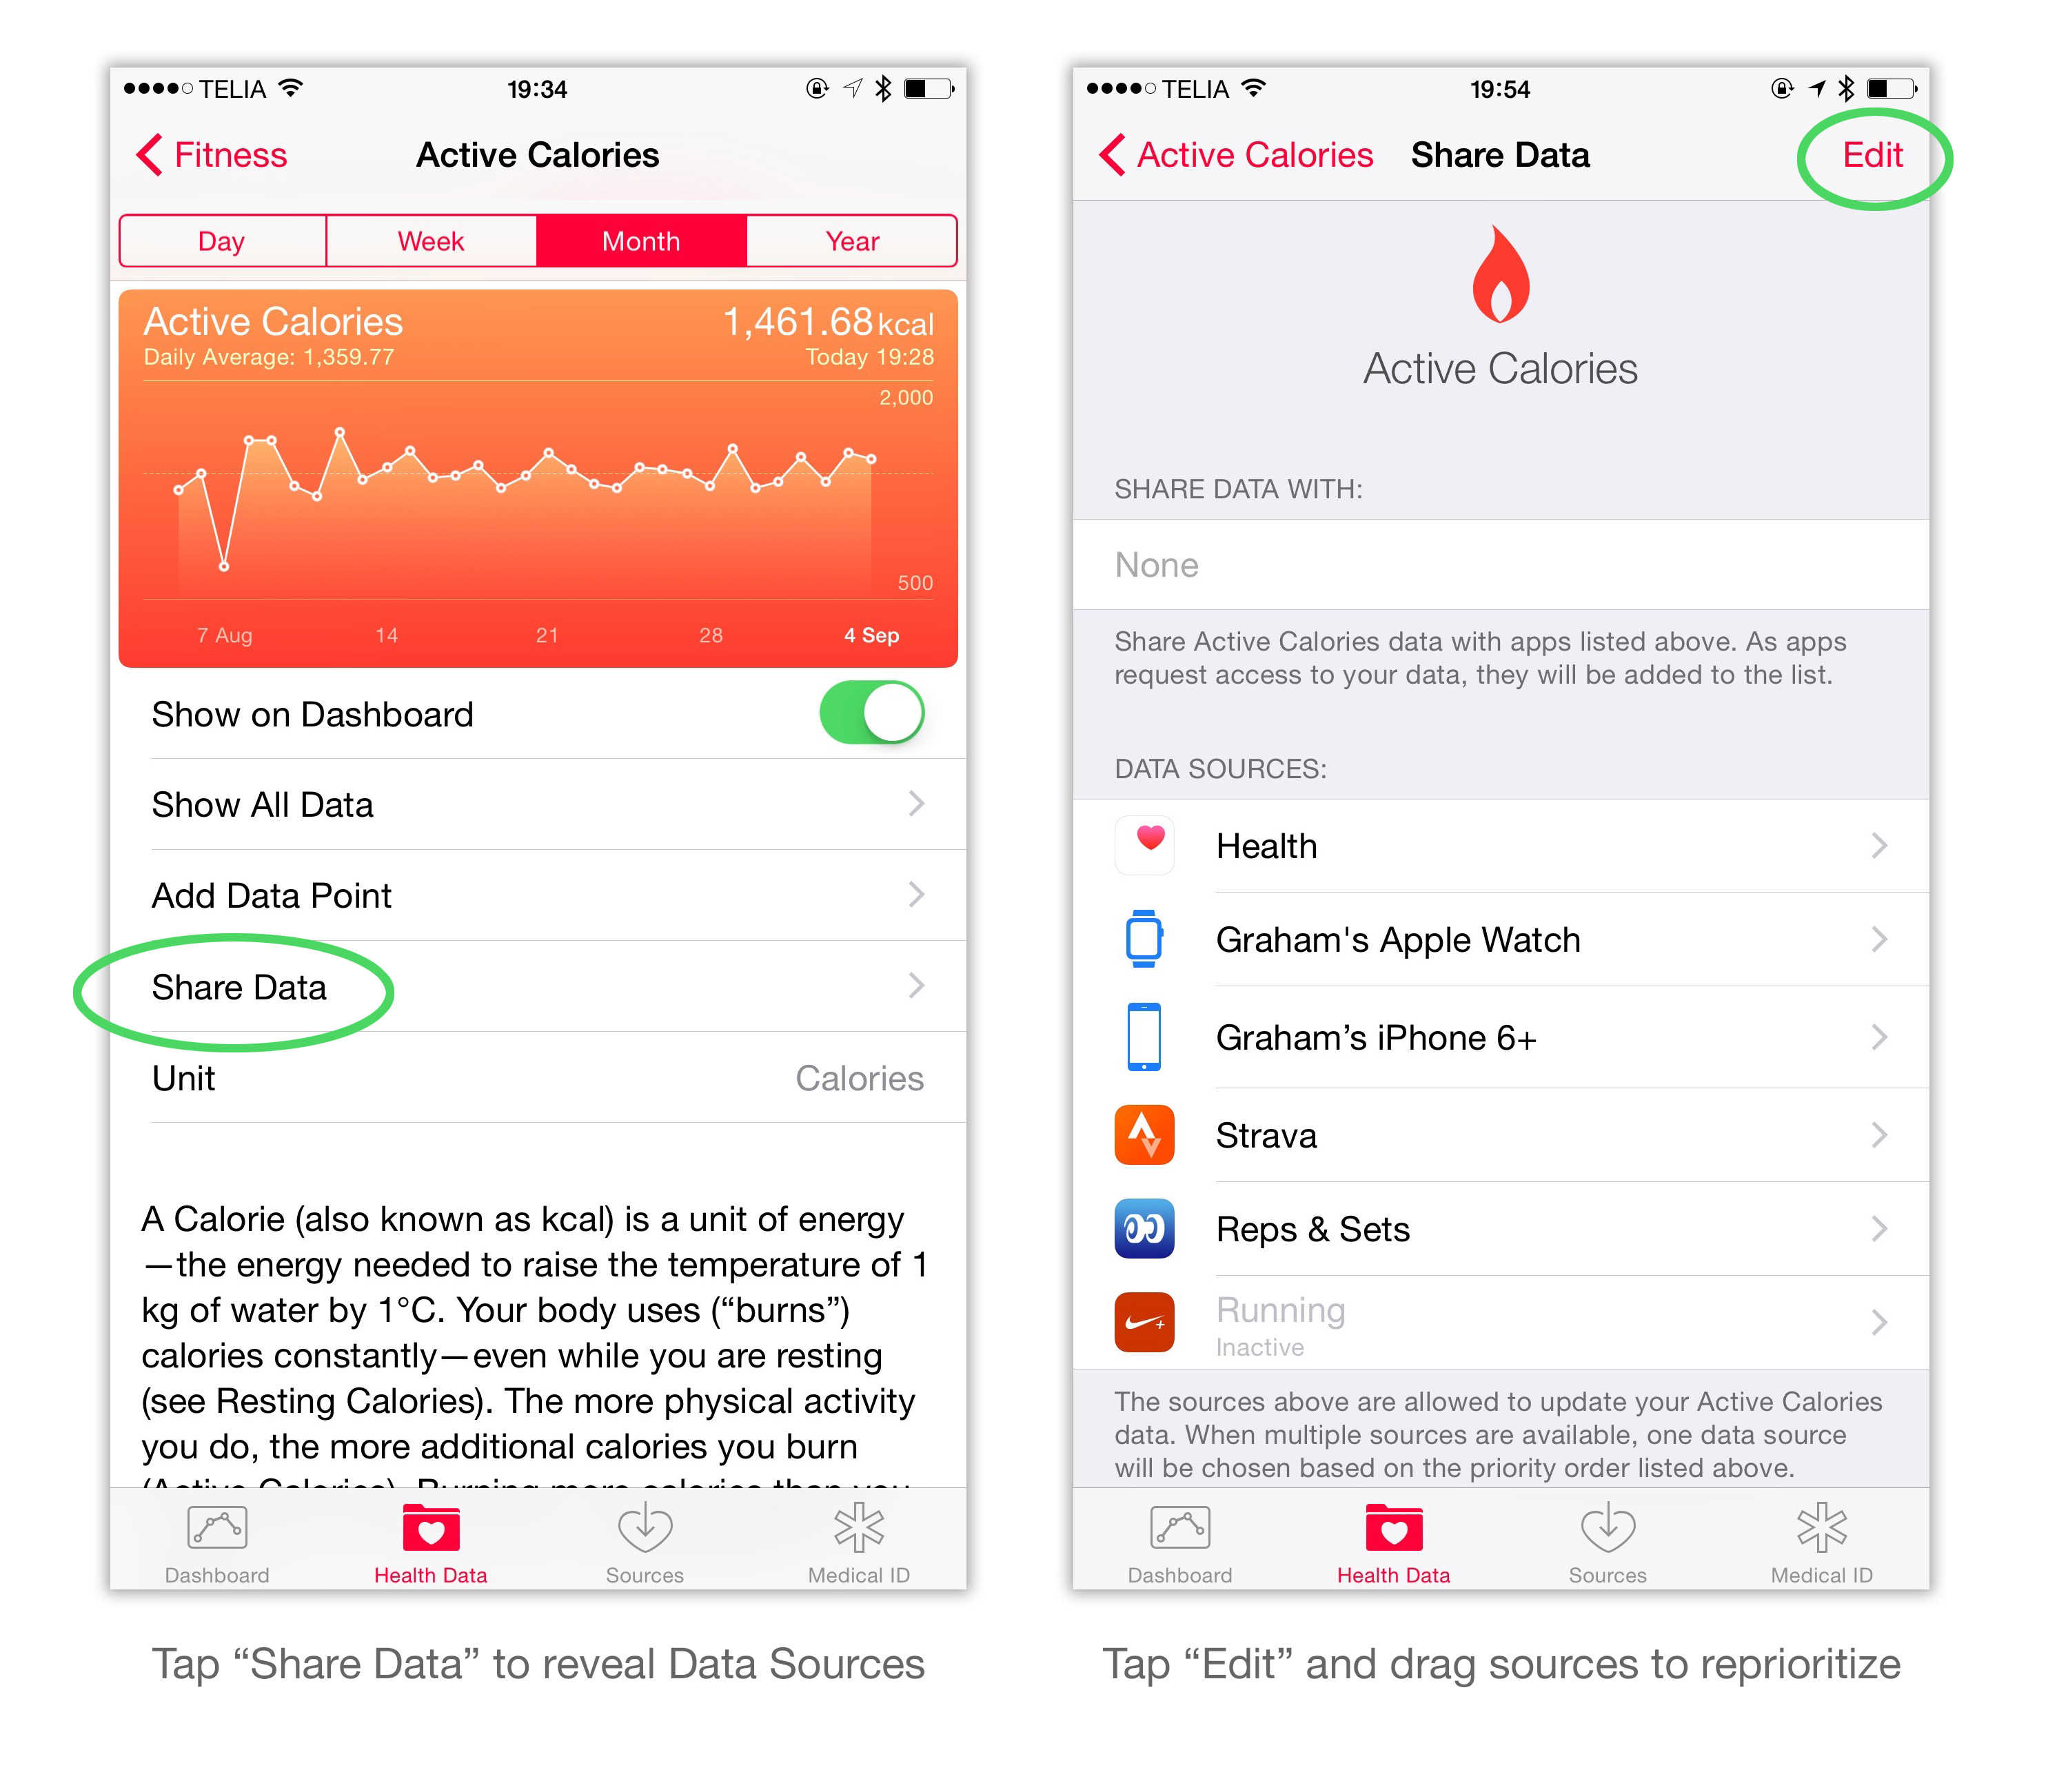 How to prioritize your data sources in the Health app